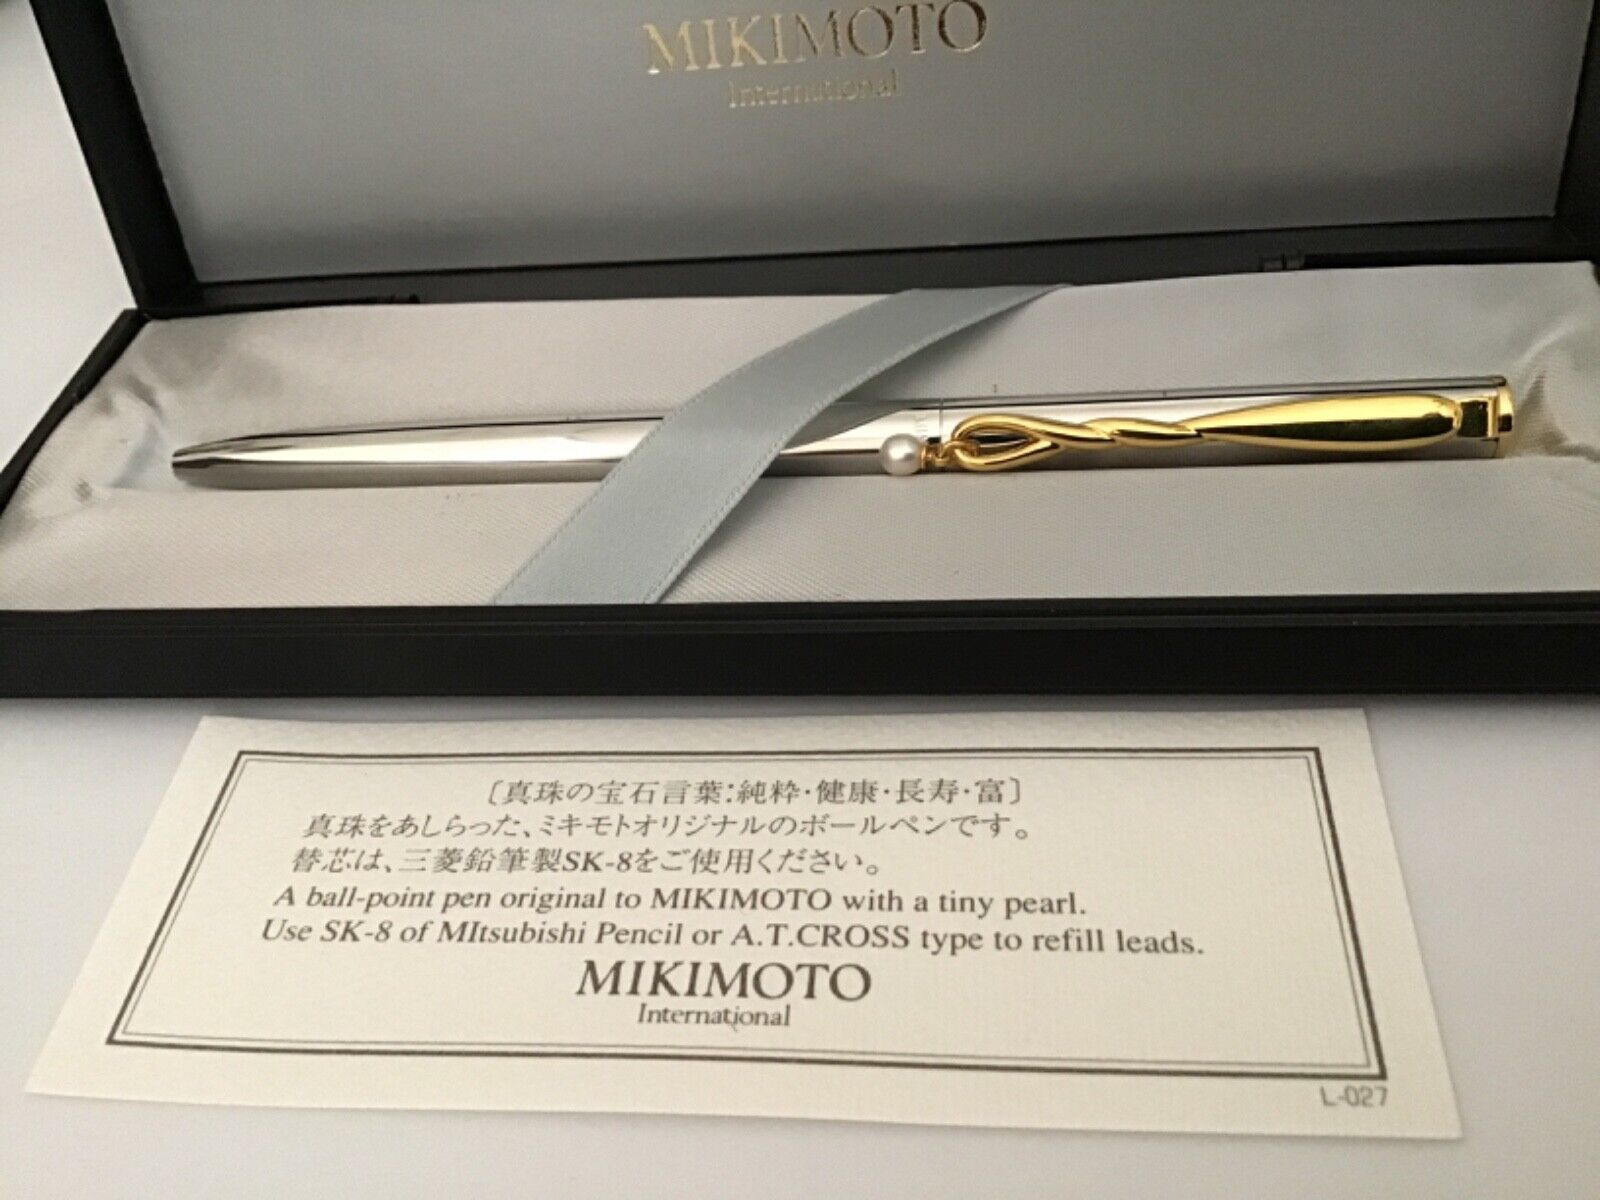 NEW Mikimoto Silver Pen - Abstract Gold Clip w/ Dangling Pearl